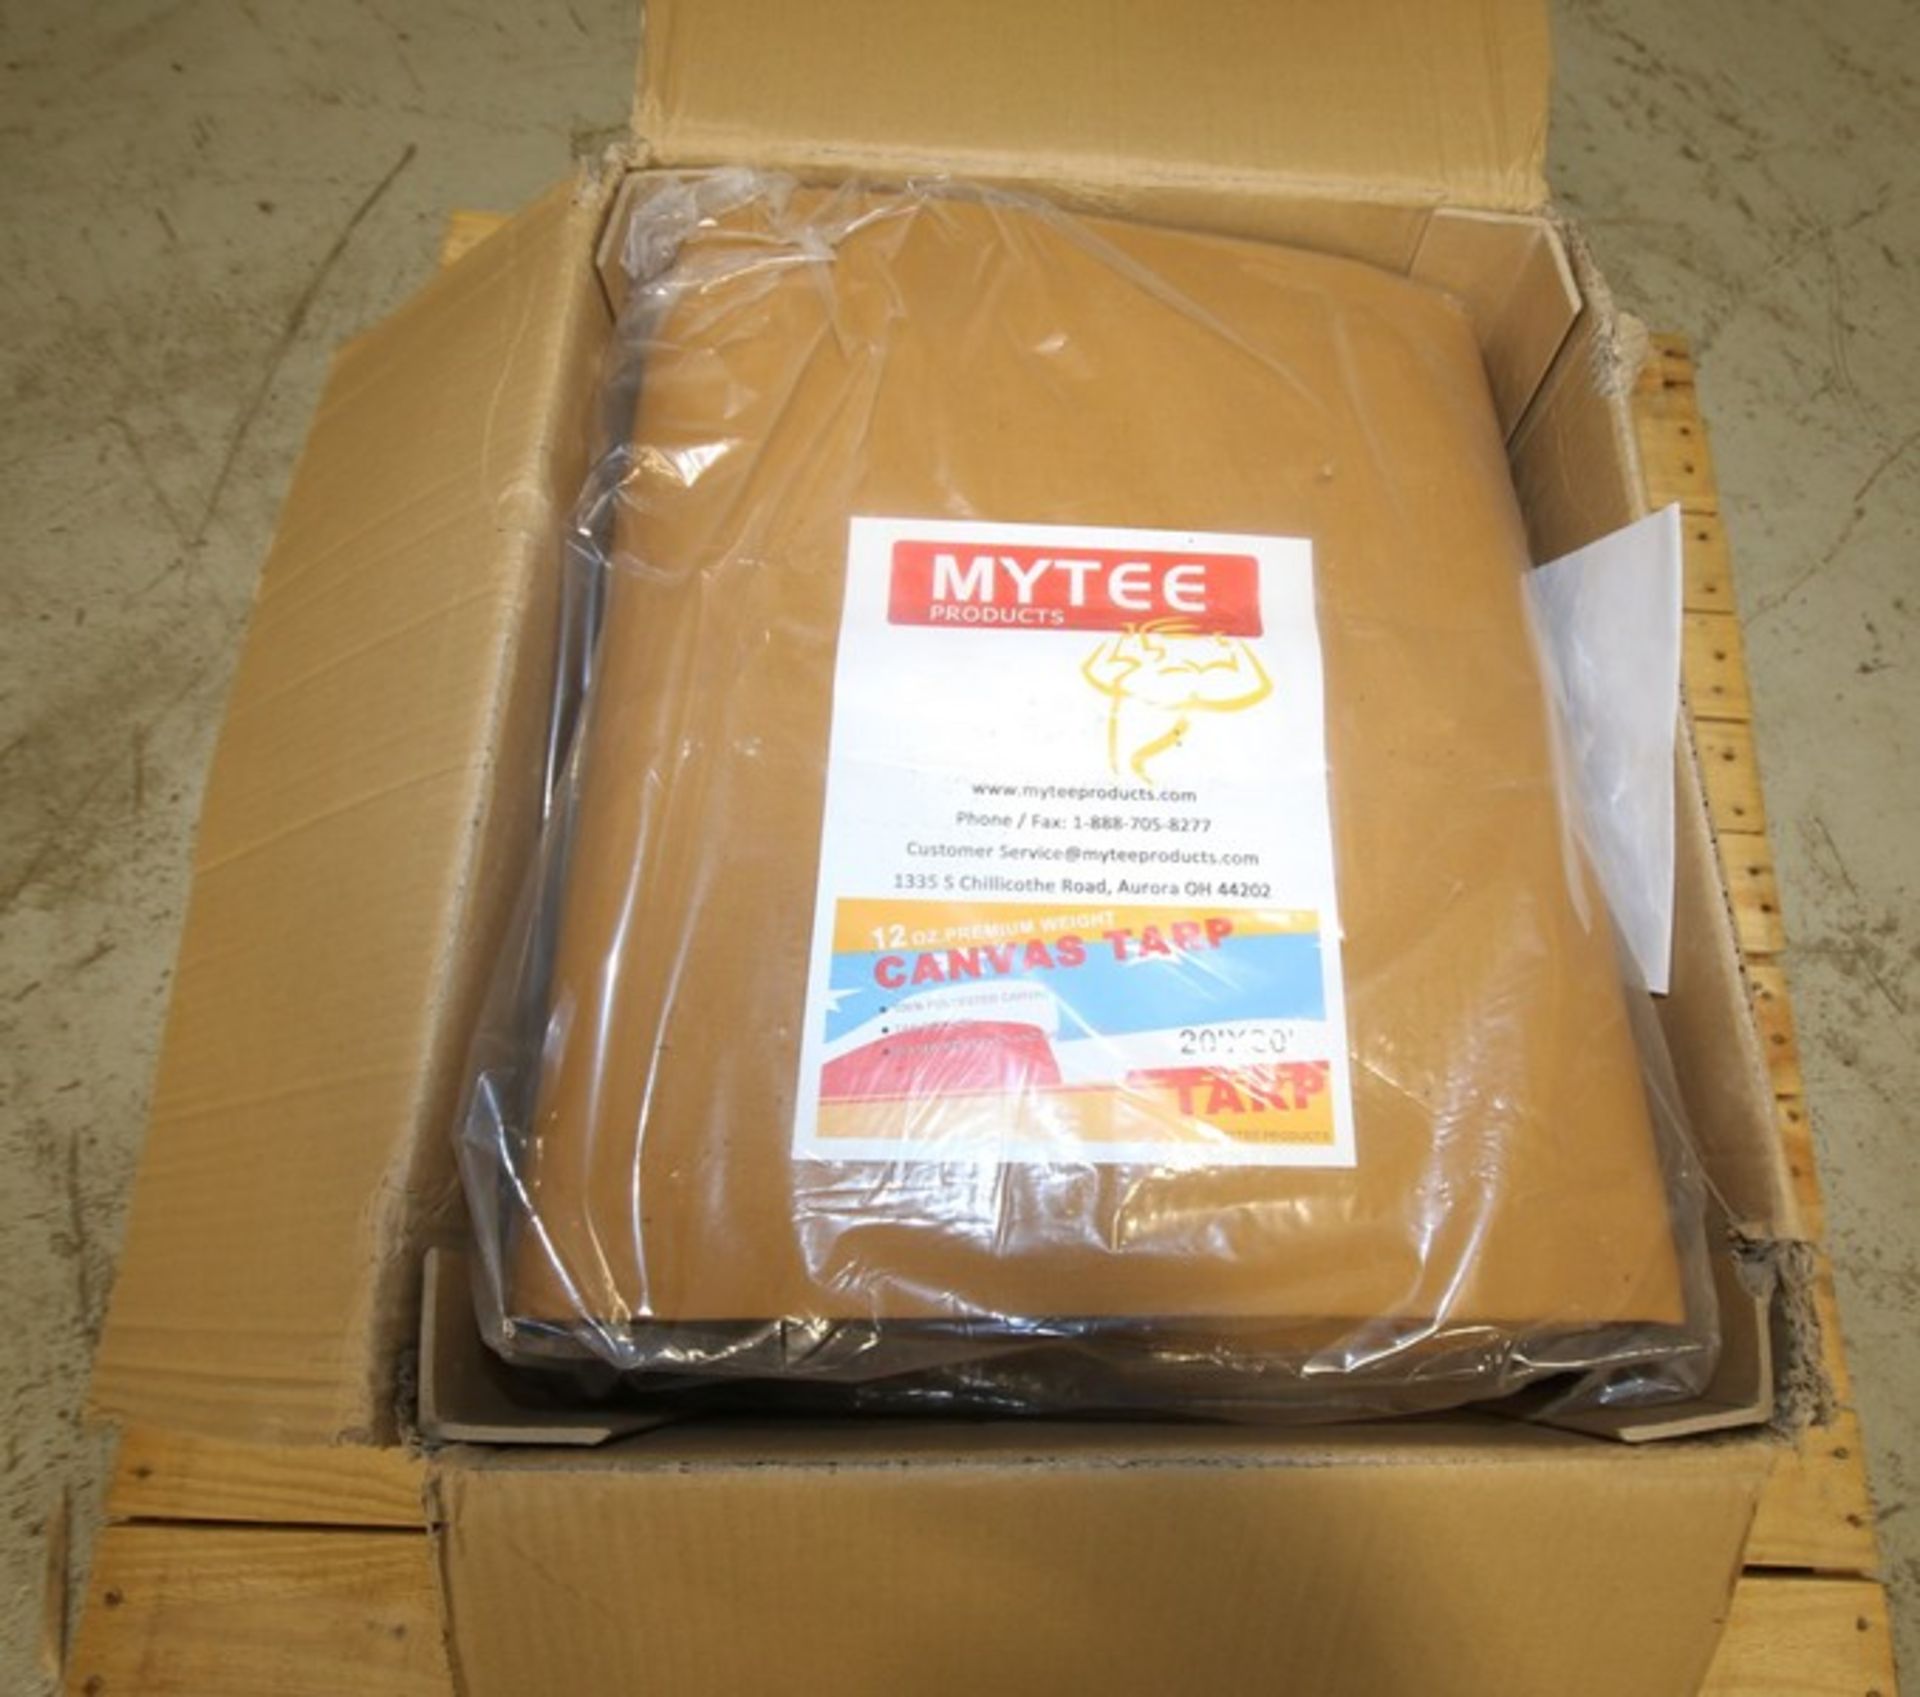 Mytee 20 x 20 New Canvas Tarp, 12 oz Weight, Order #VC484D (INV#66959) (Located @ the MDG Auction - Image 2 of 4